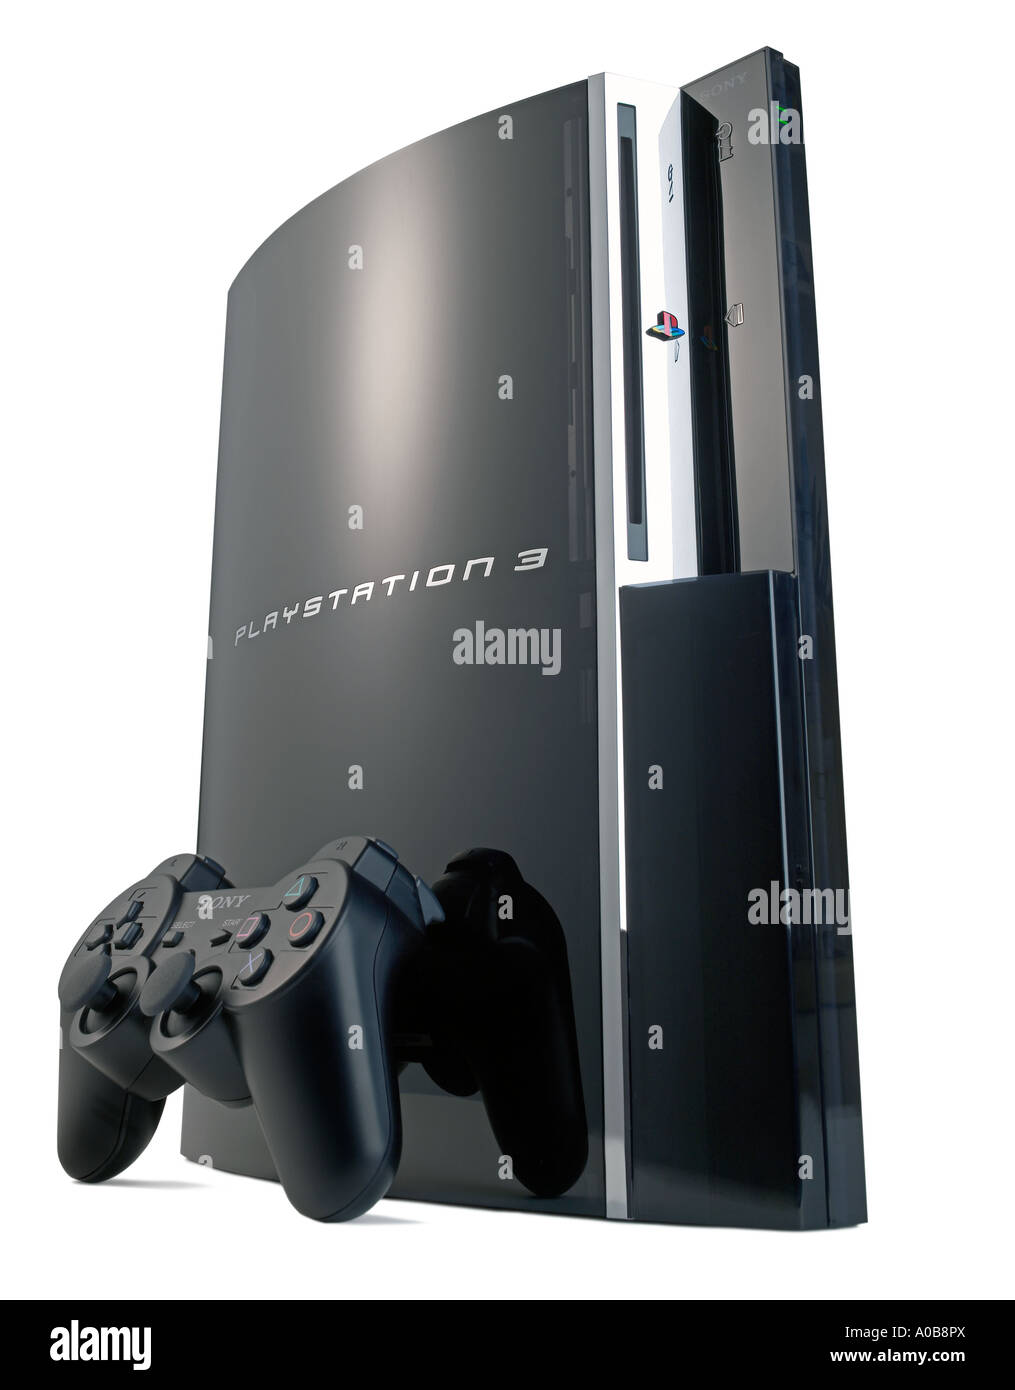 Sony Playstation 3 video Game console Stock Photo